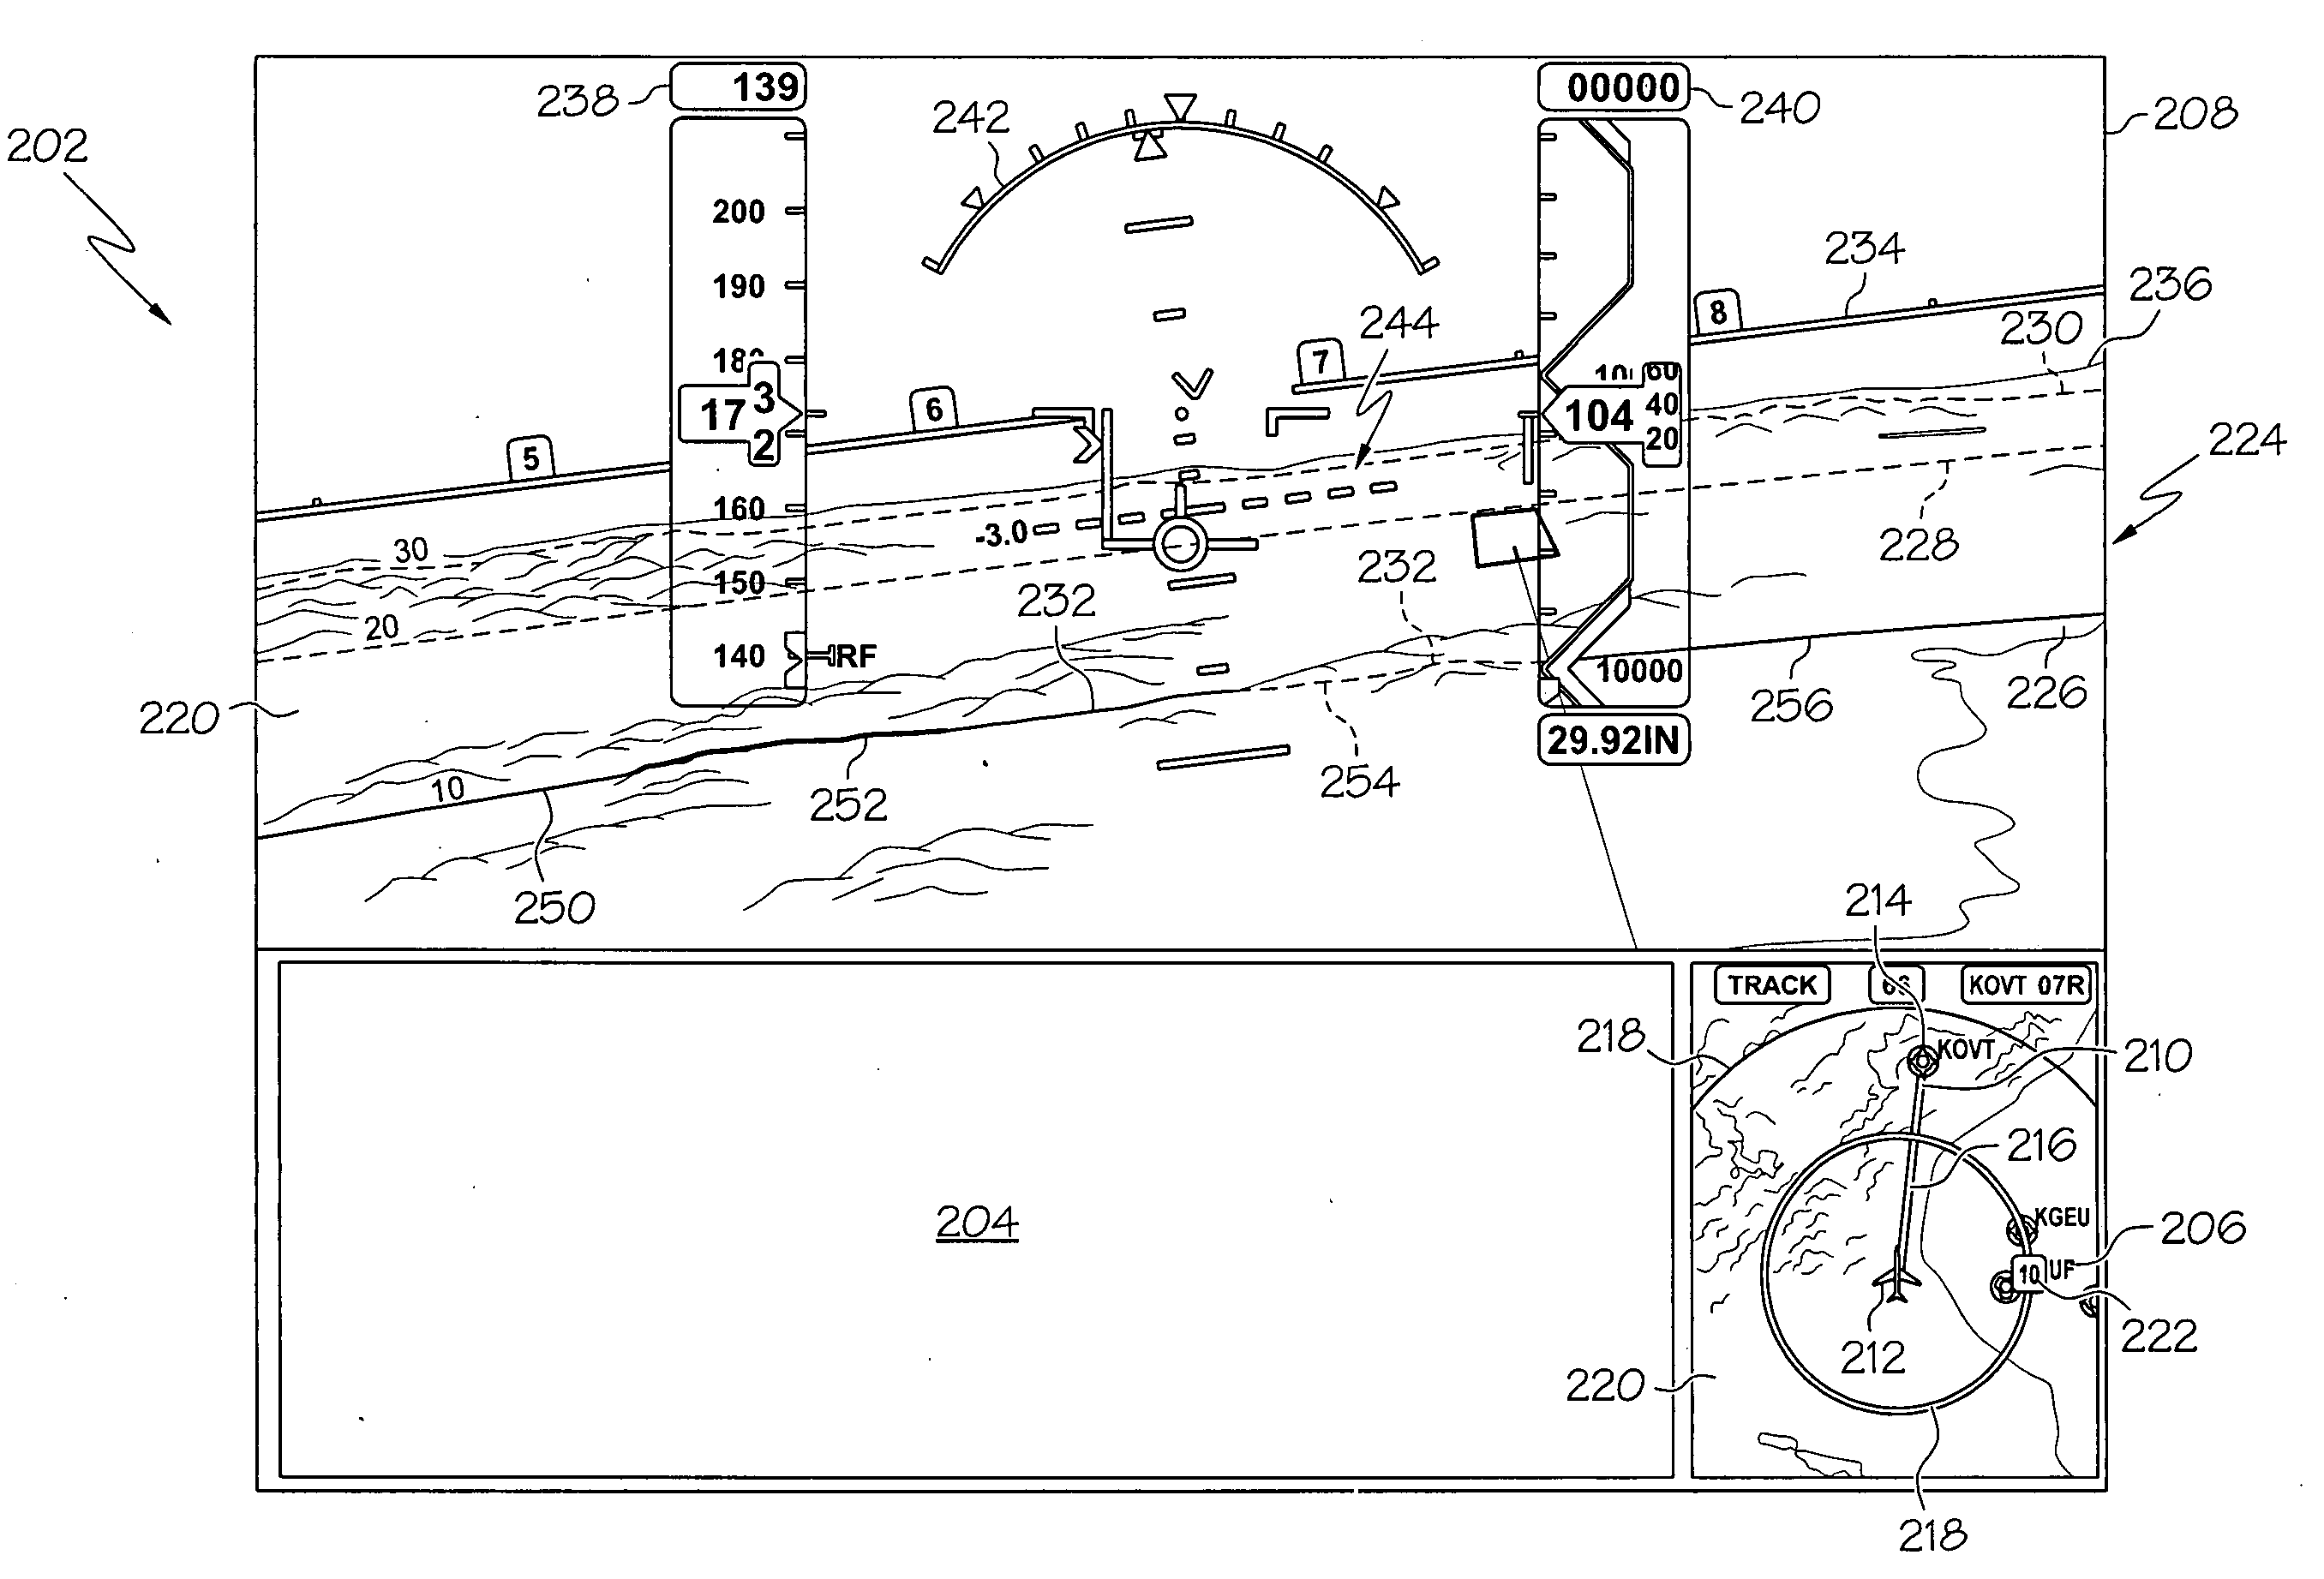 Perspective view primary flight display with terrain-tracing lines and method